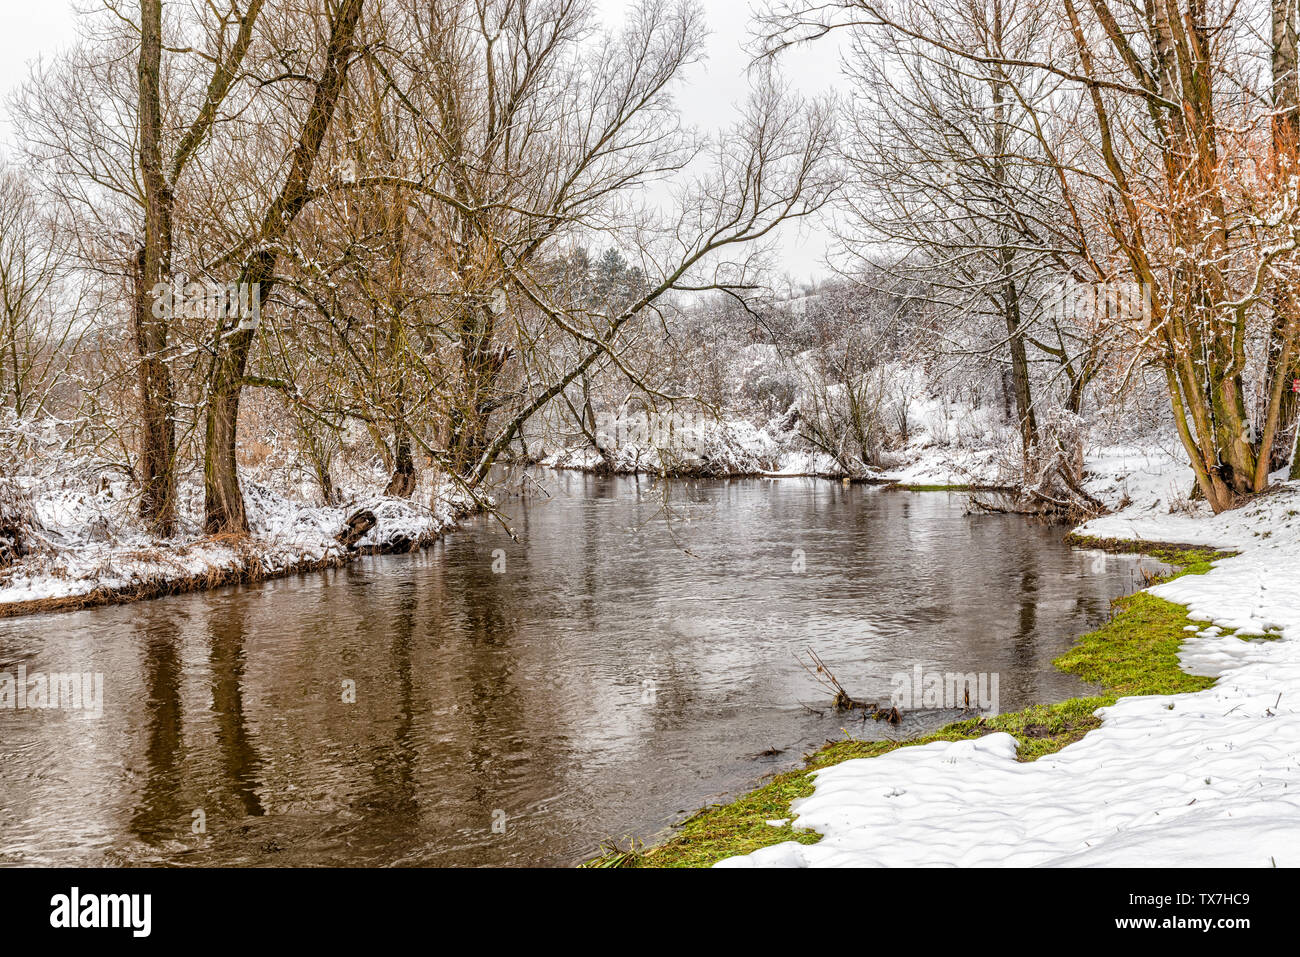 View at beautiful winter landscape in the snowy forest and Warta river in Mstow, Poland, January. Stock Photo